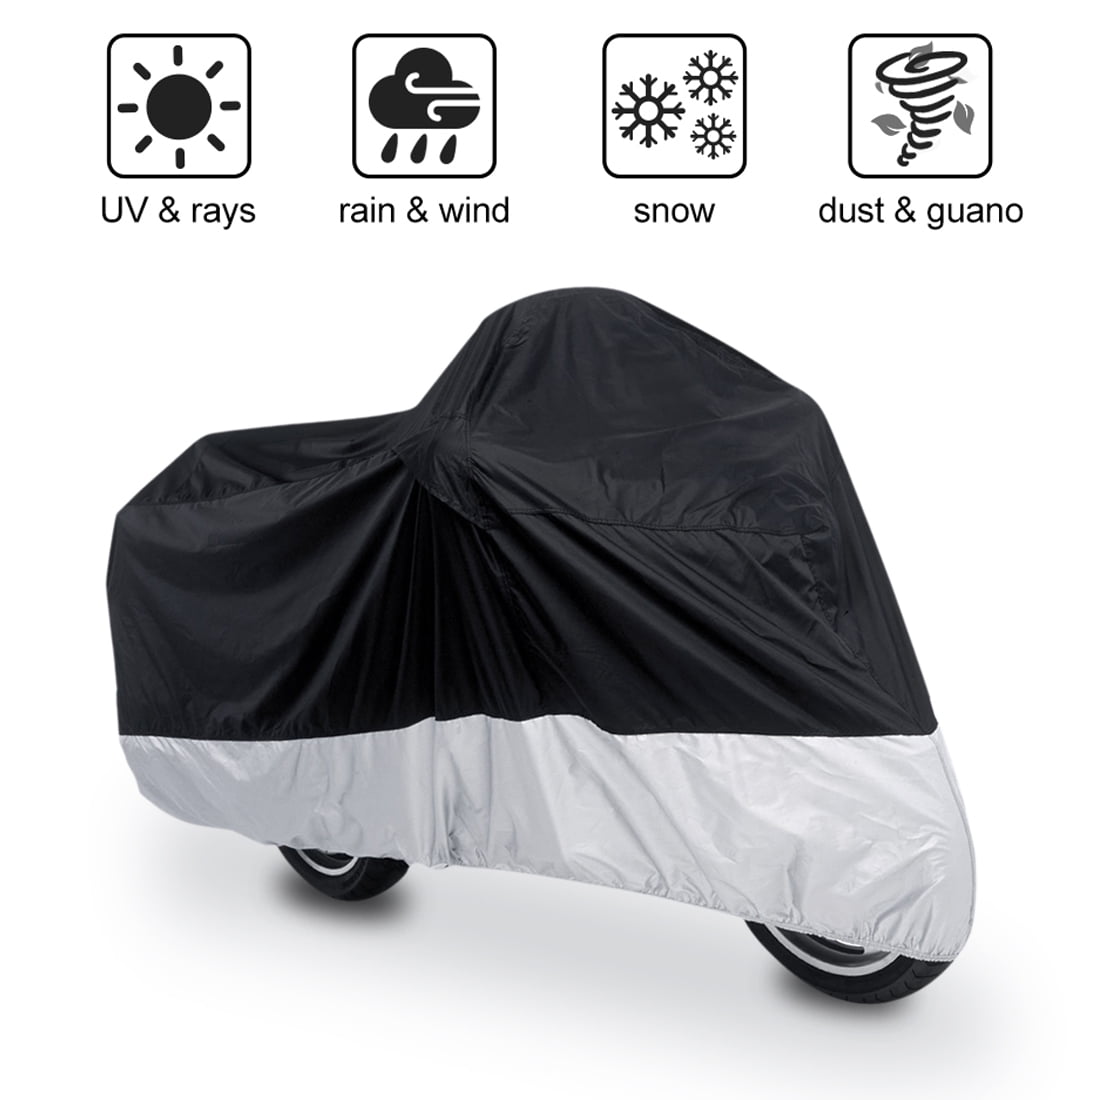 Motorcycle Cover Moped All Weather Protection Standard Street Scooter US Stock 